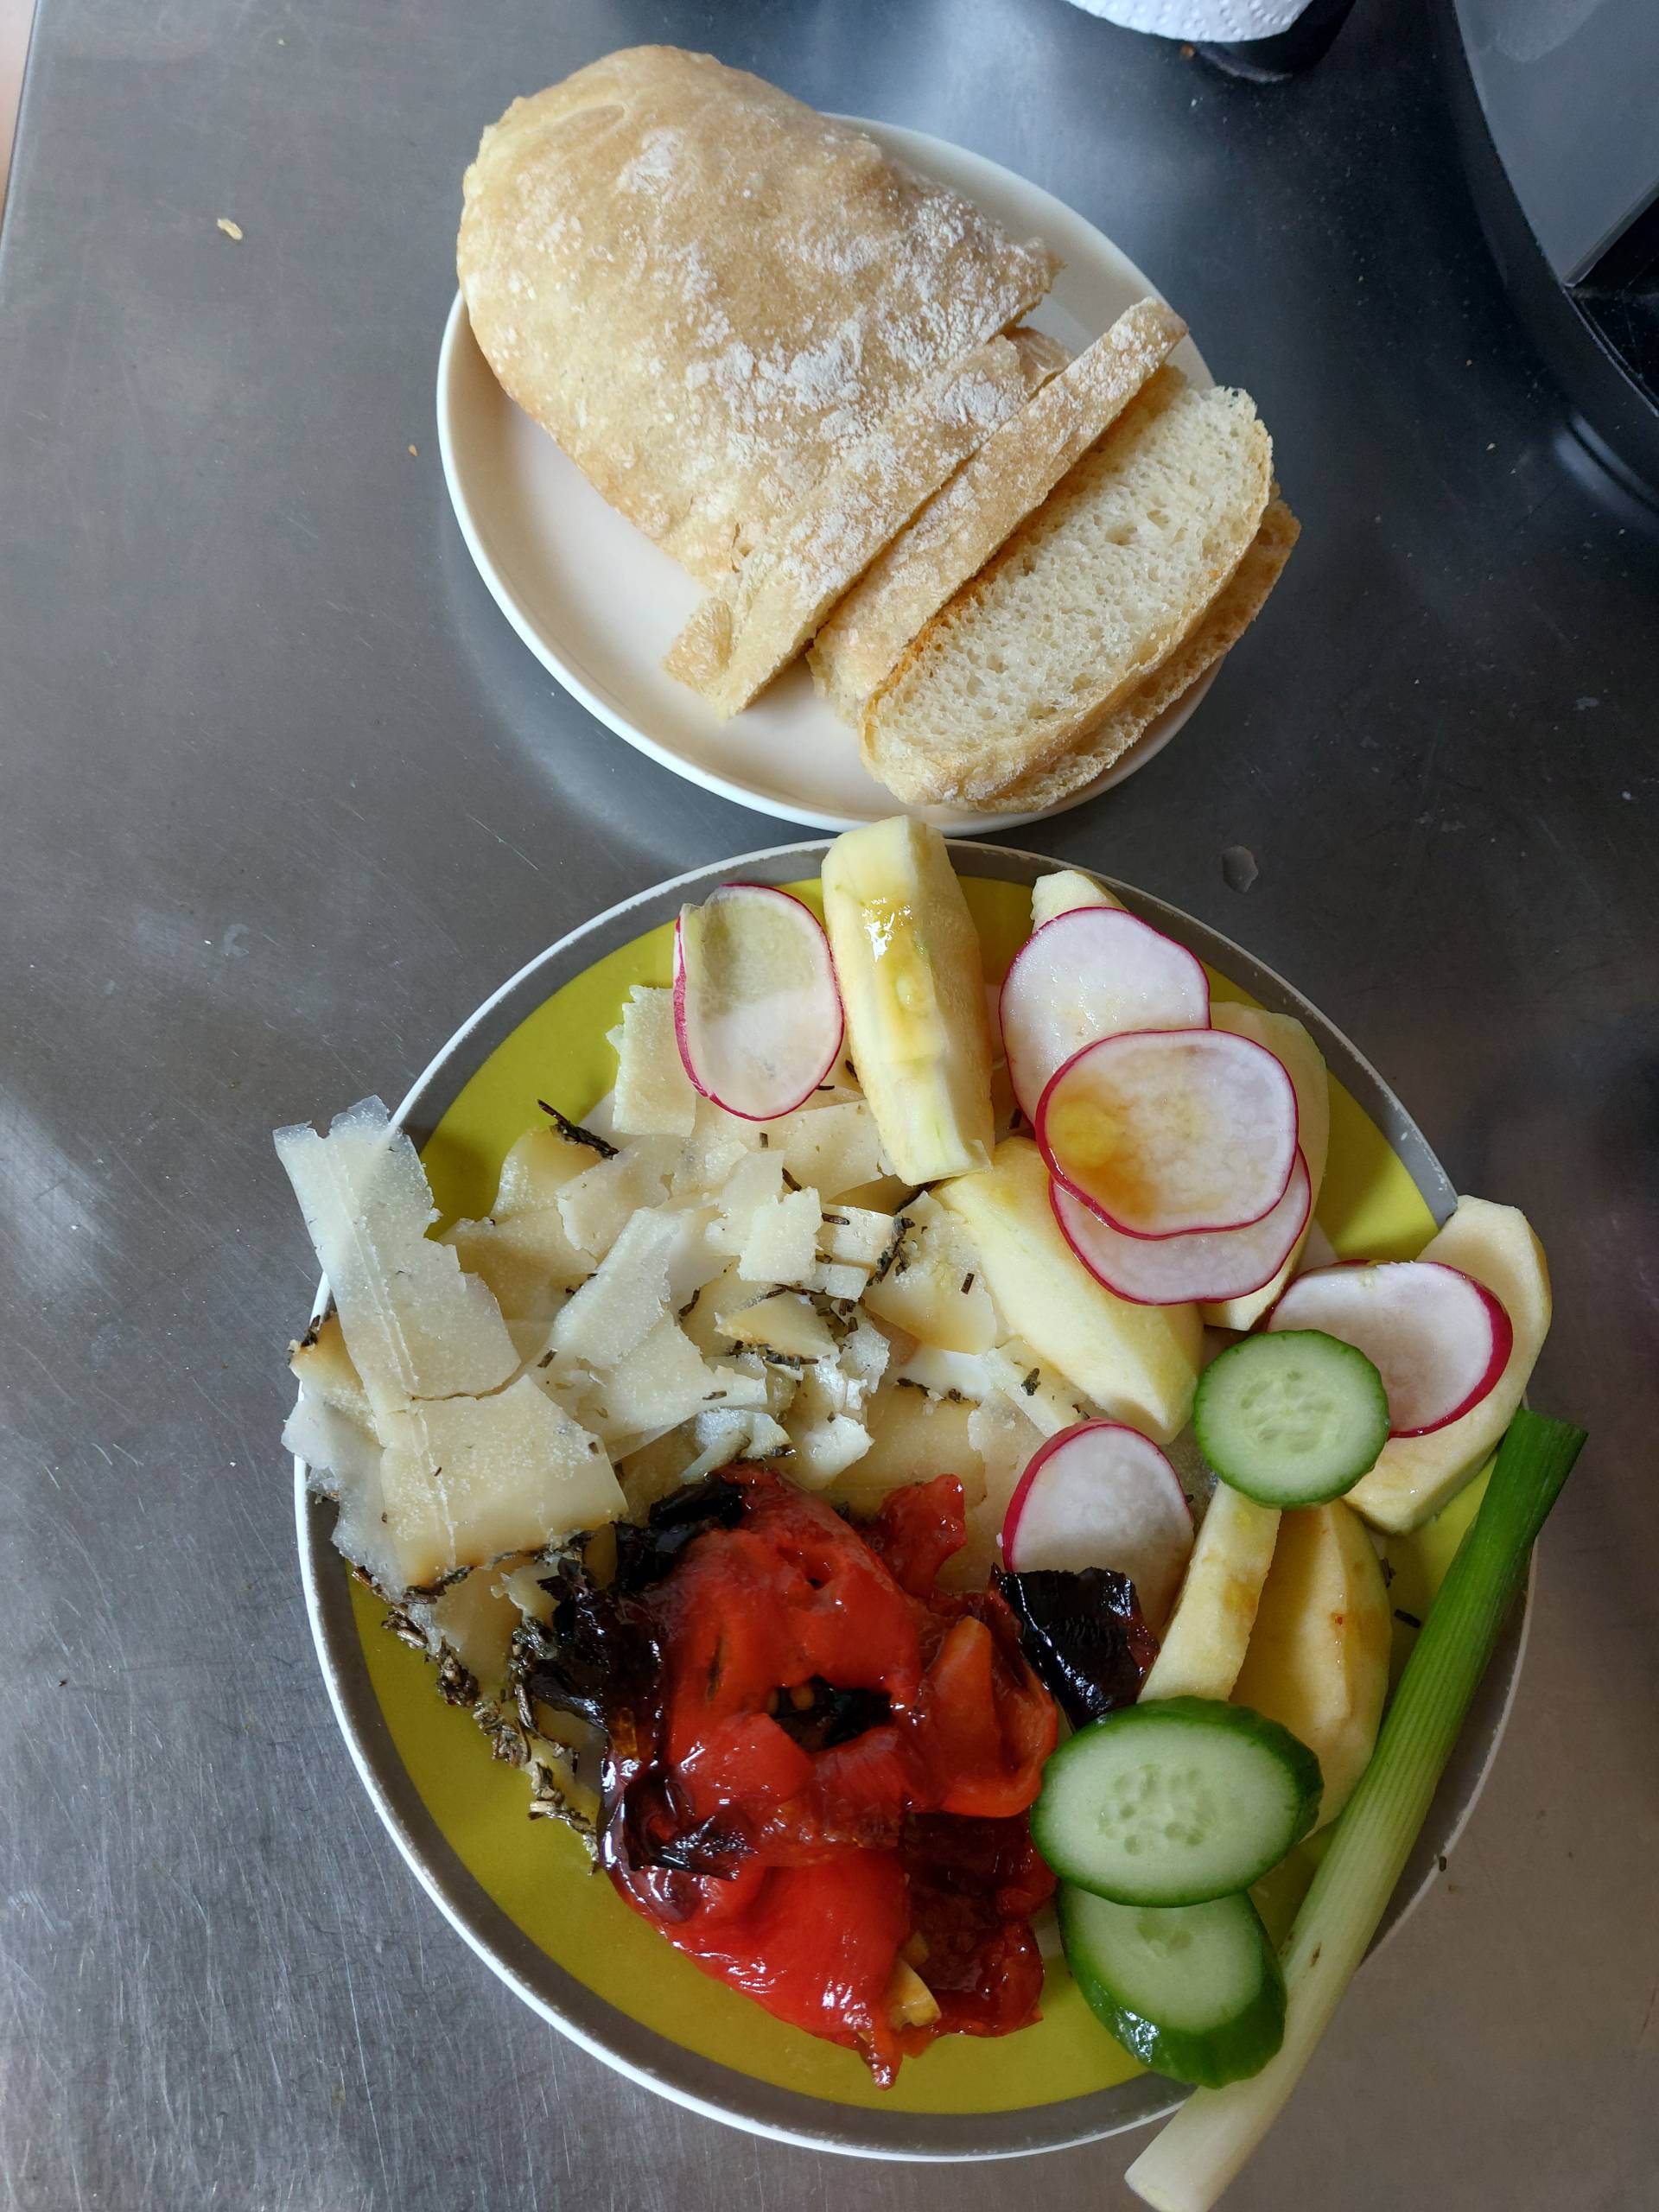 How to make apple and cheese salad?